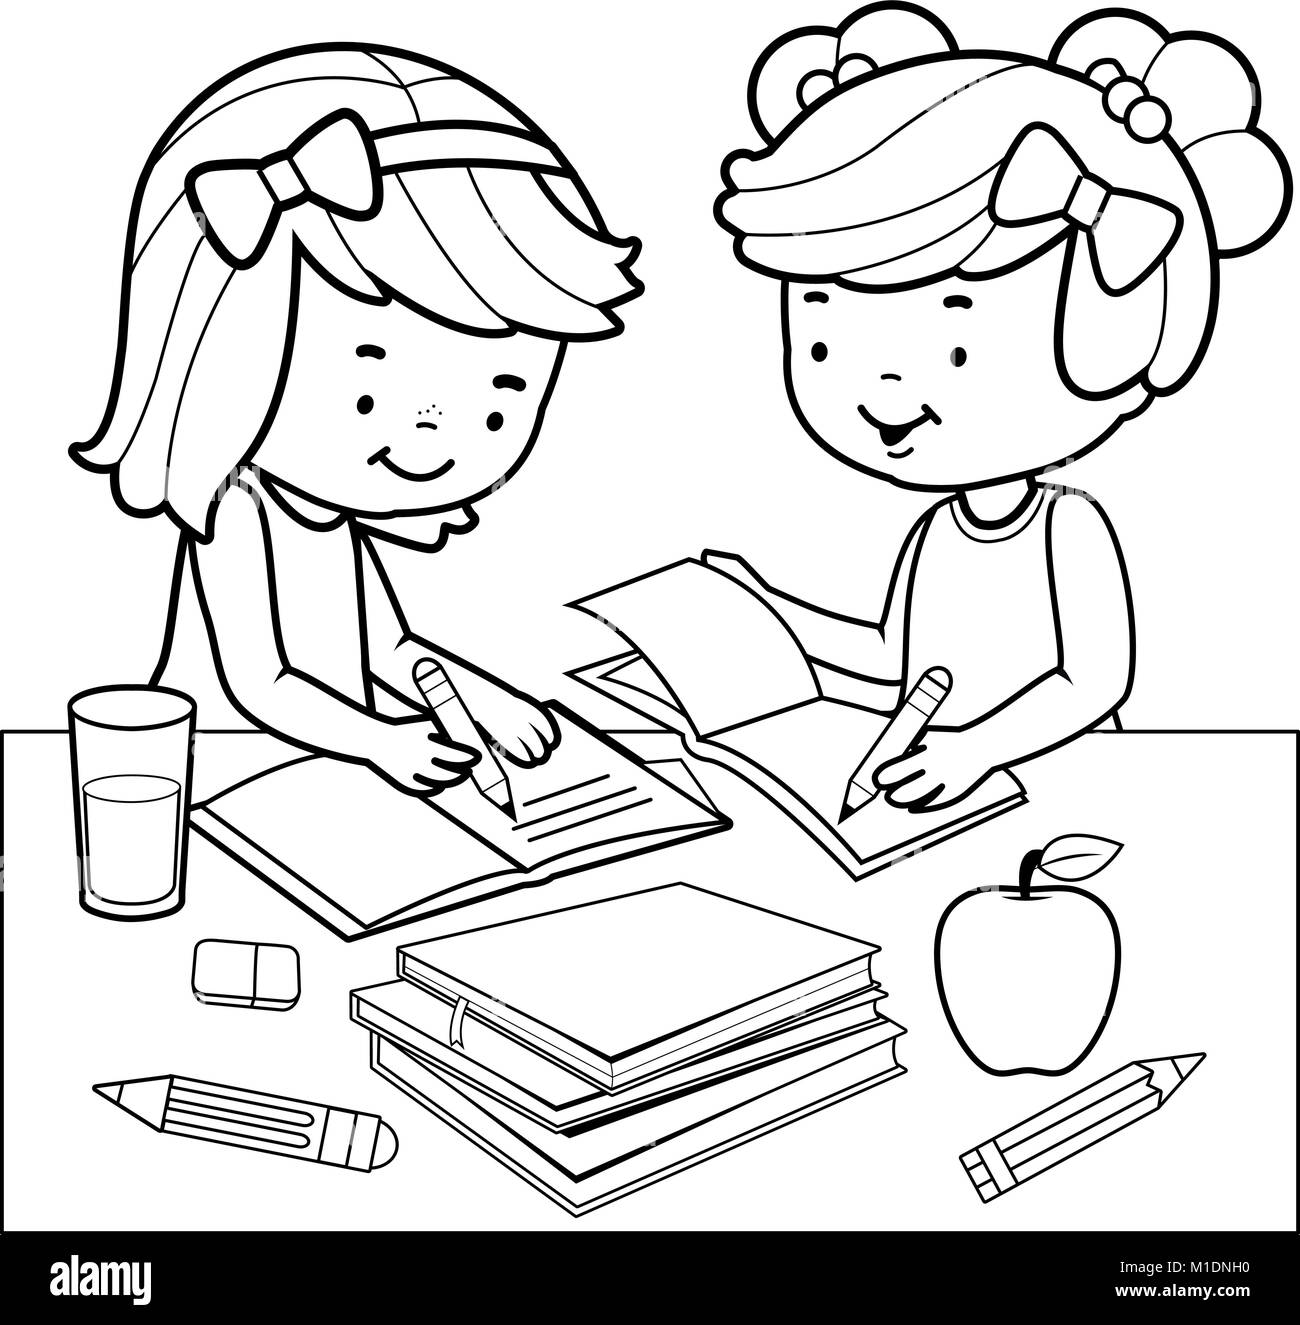 Students doing homework. Black and white coloring book page. Stock Vector